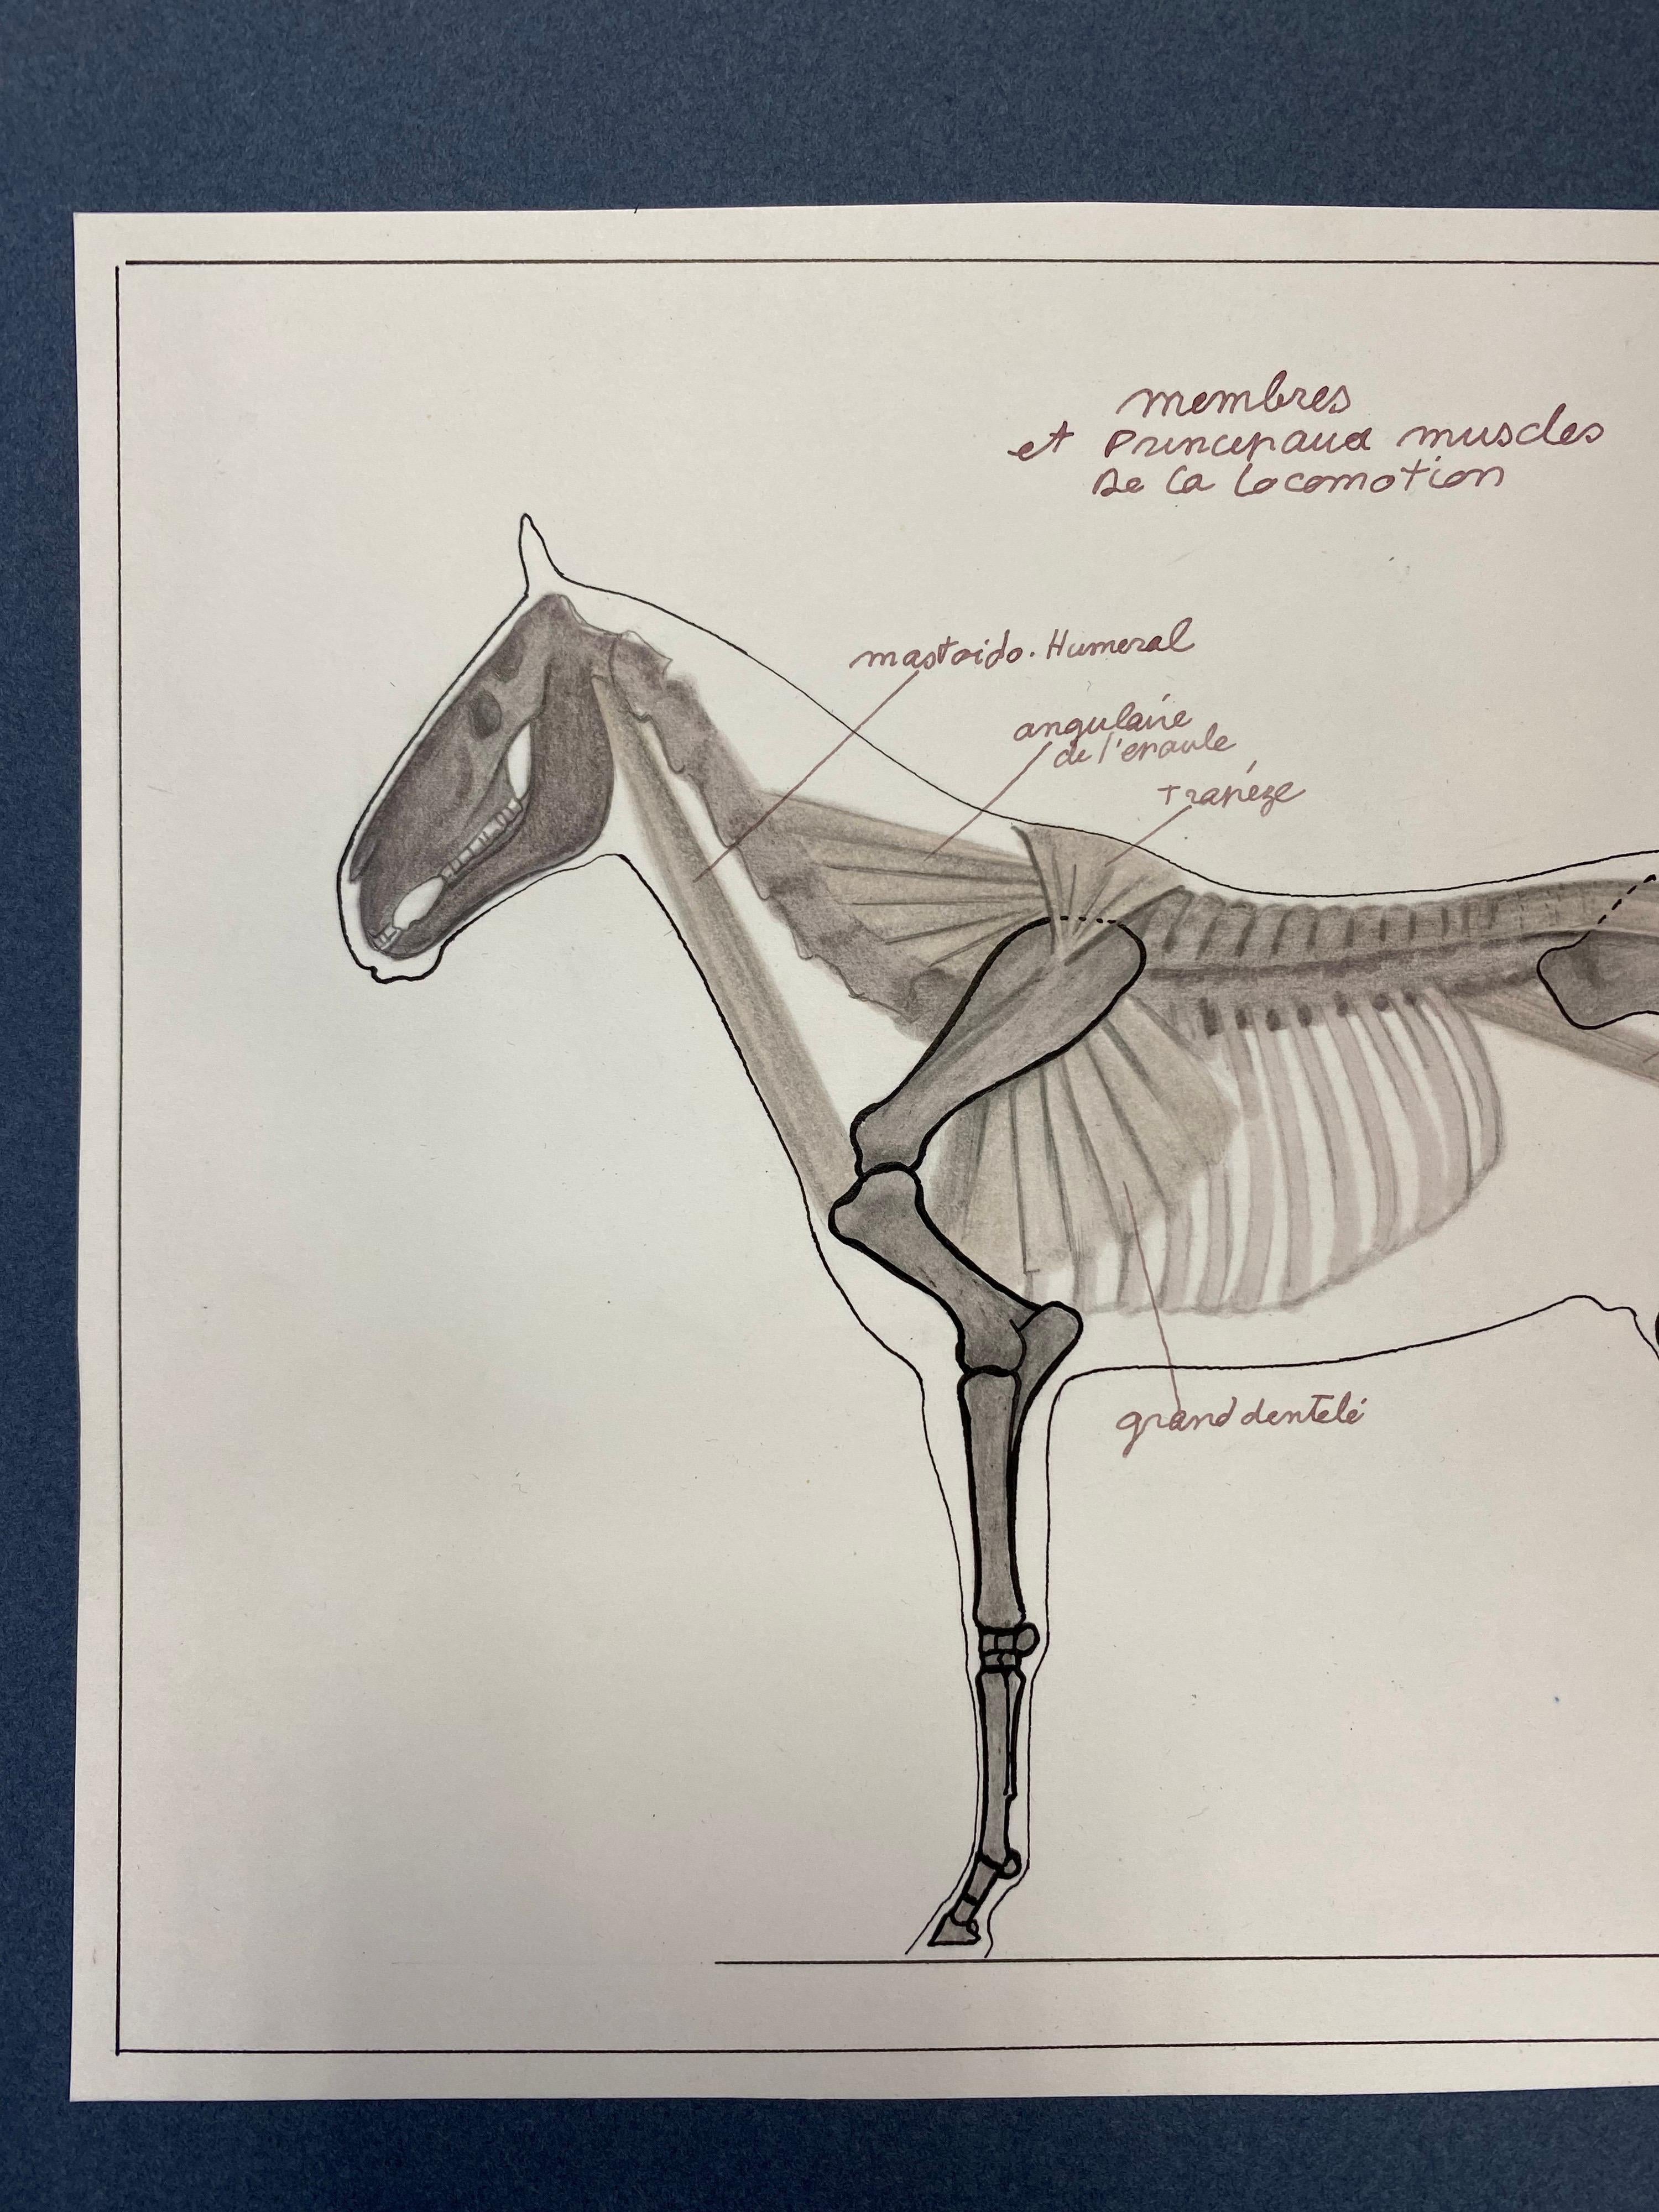 Other Anatomy Drawings of a Horse, Original French Artwork Equestrian Anatomy Study